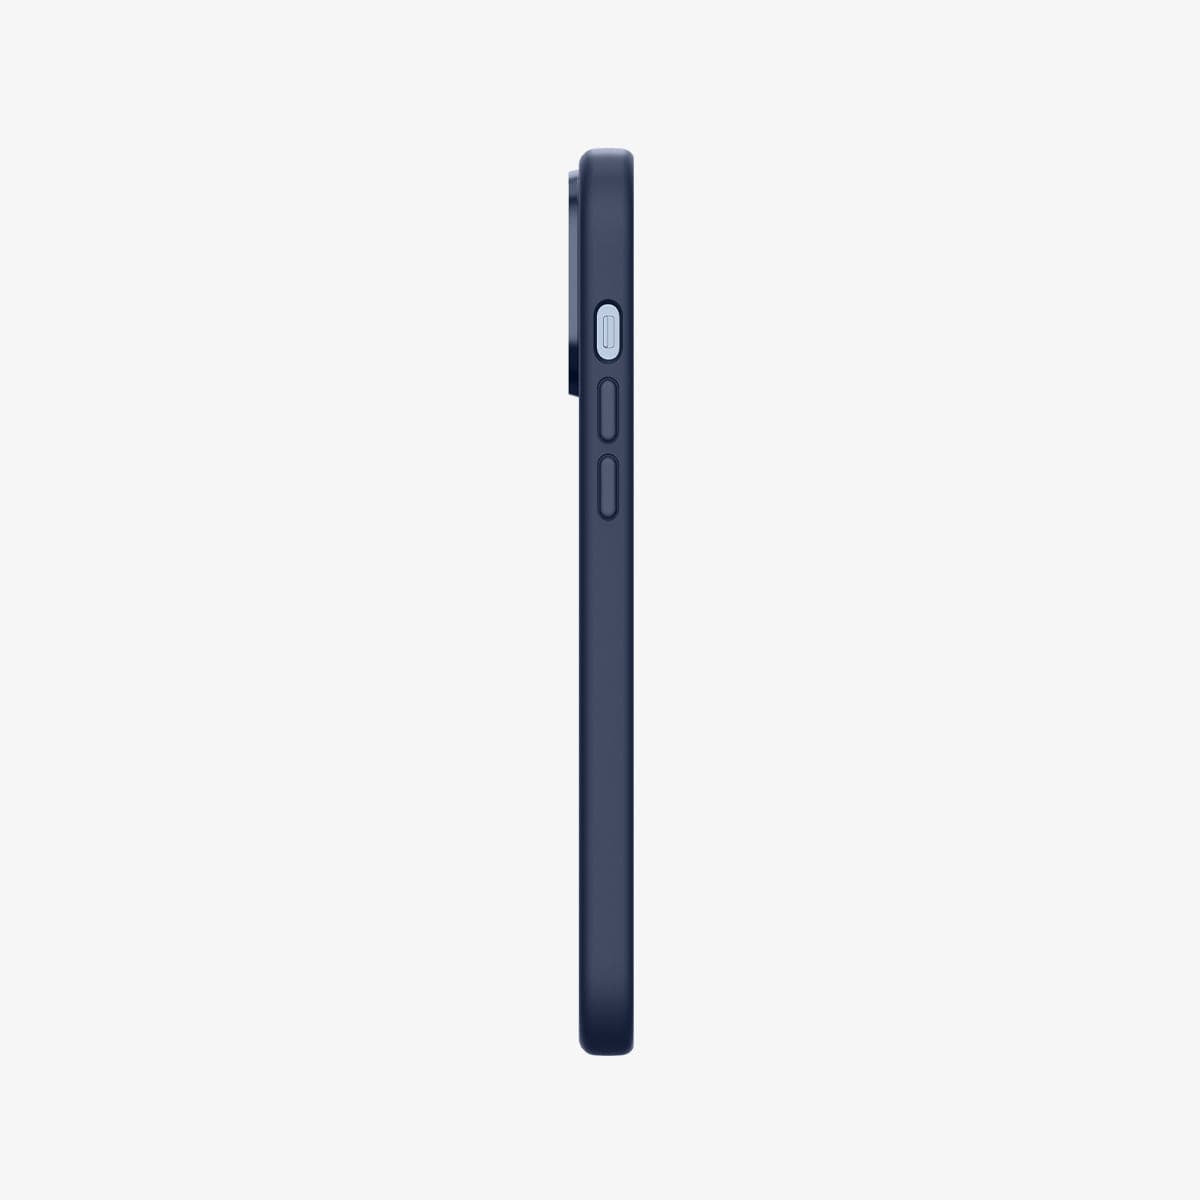 ACS03230 - iPhone 13 Pro Max Case Silicone Fit in navy blue showing the side with volume controls